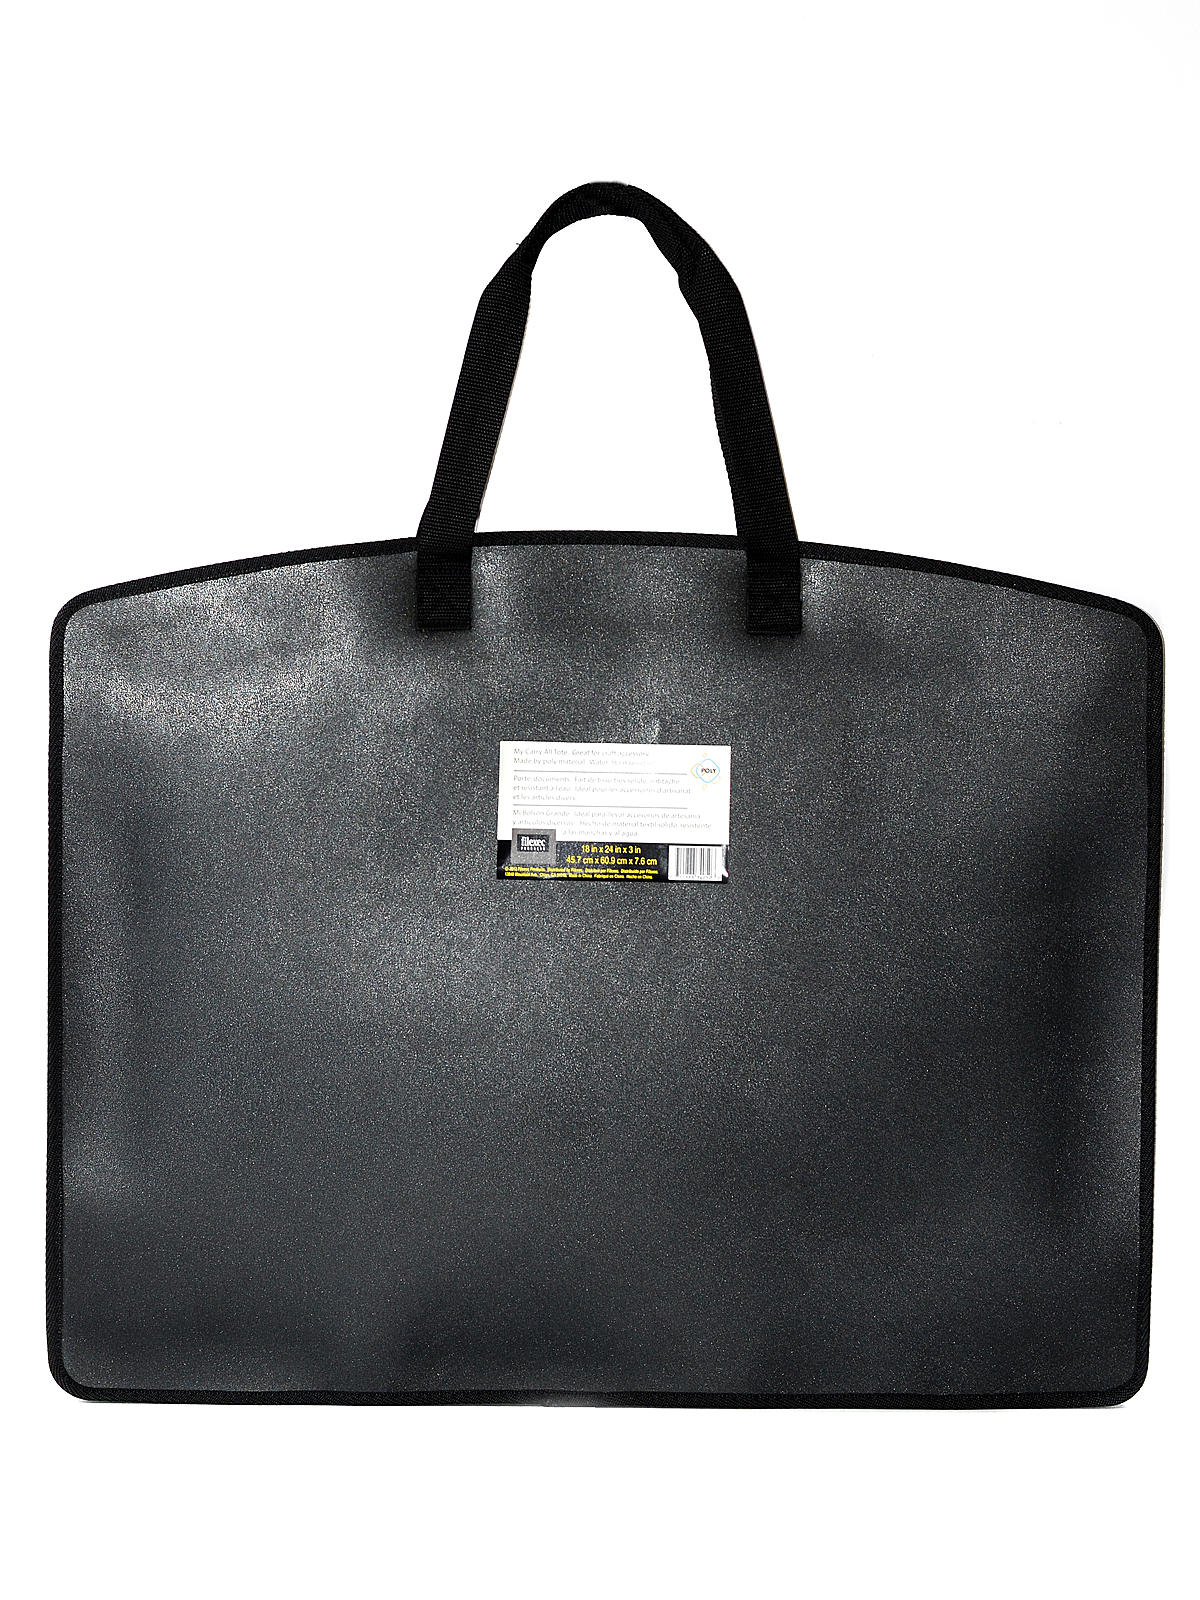 My Carry All Tote 18 In. X 24 In. Black